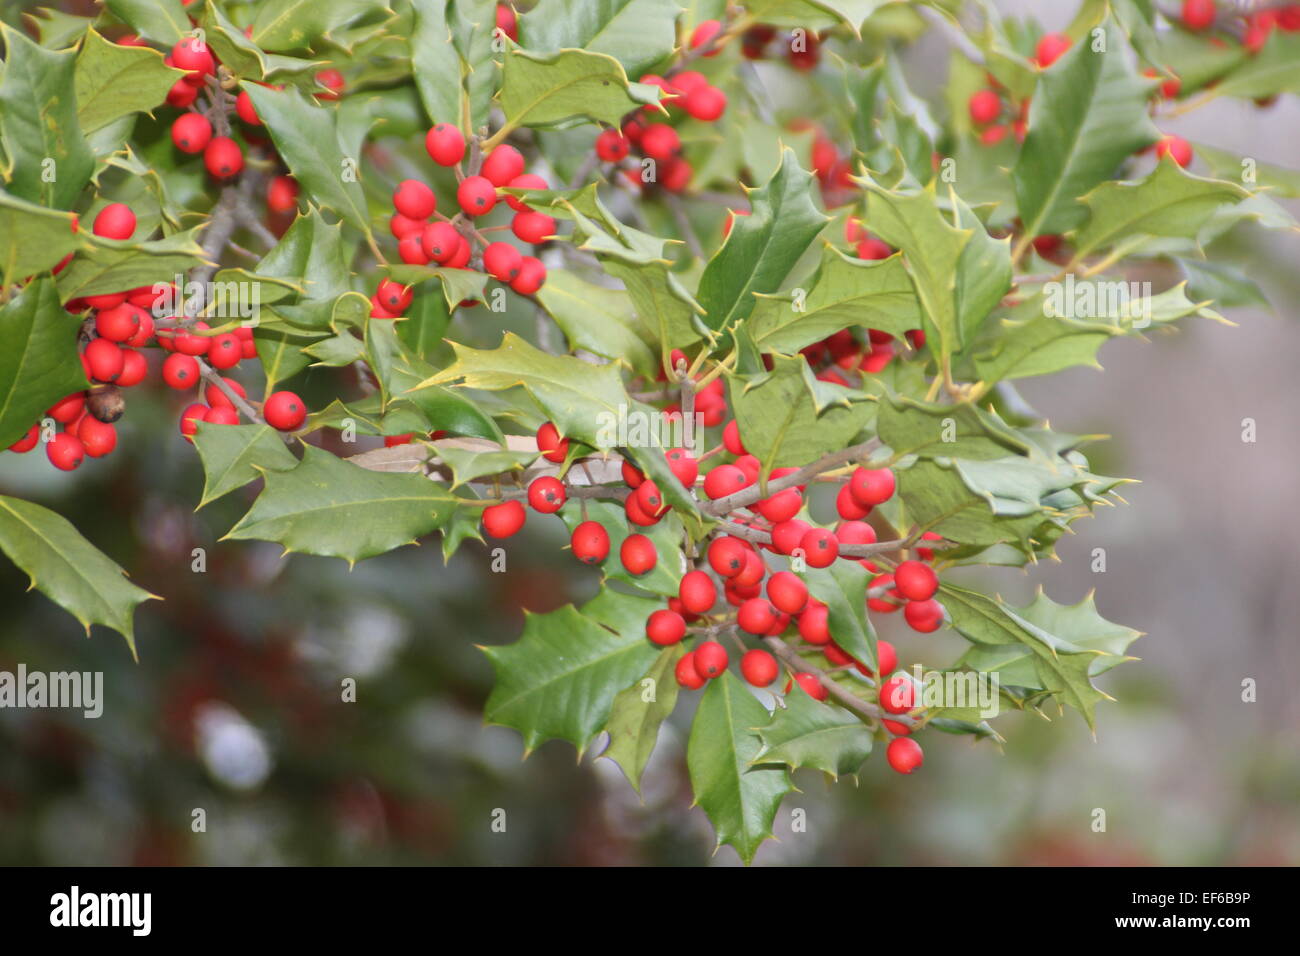 Holly berries and leaves from an American Holly Tree. Stock Photo